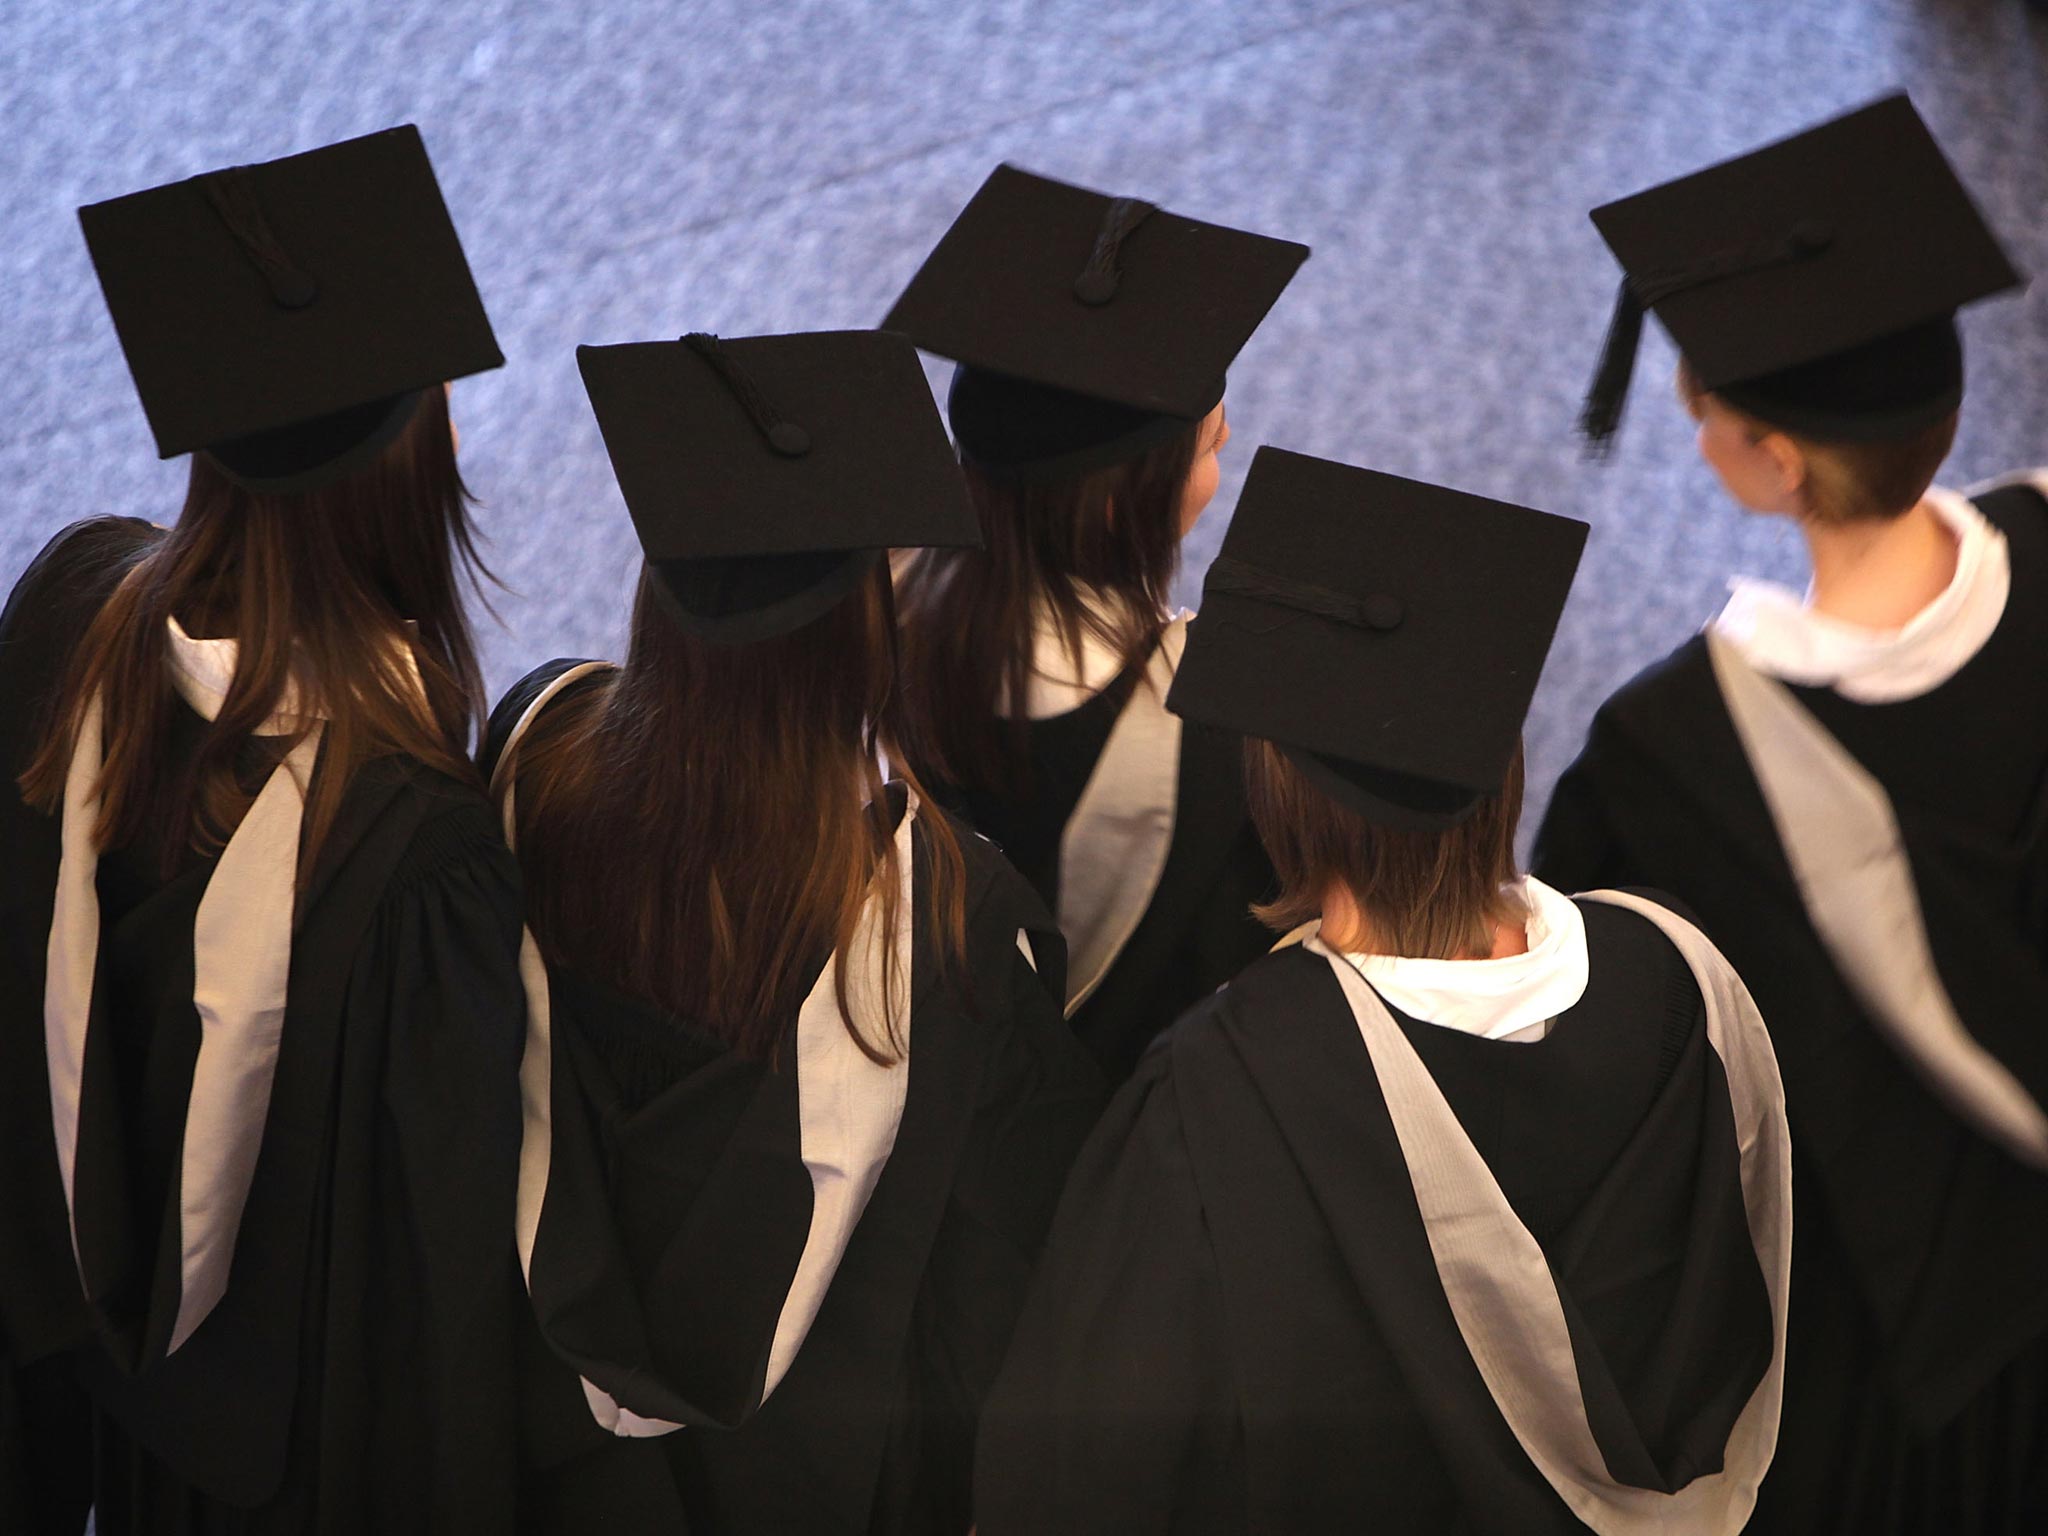 The new report says that MPs have underestimated the amount that will be recovered from student loans